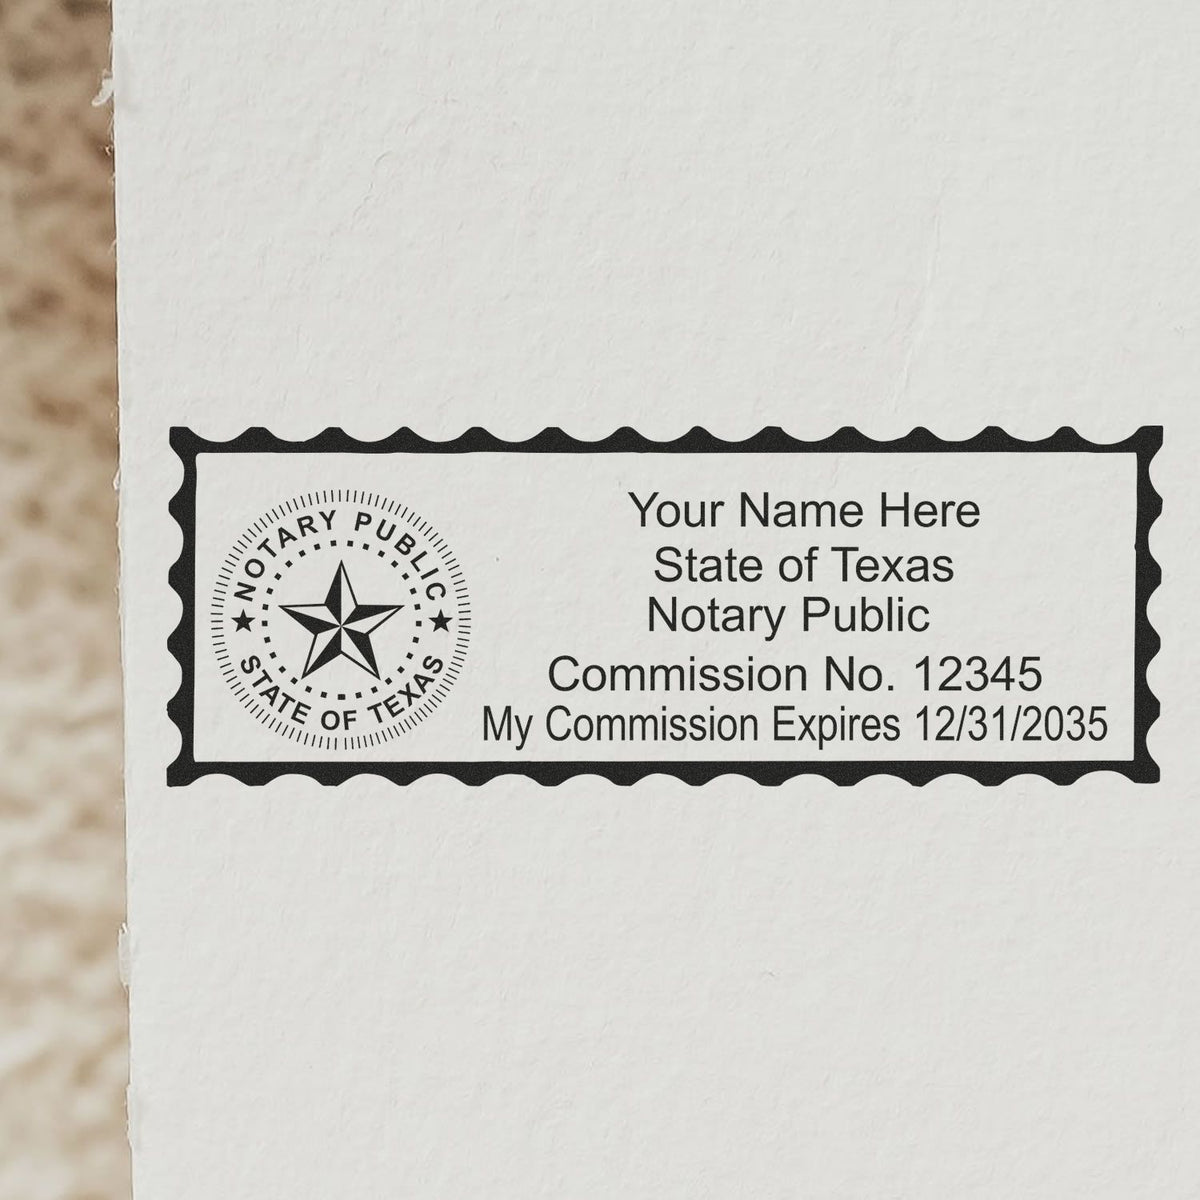 This paper is stamped with a sample imprint of the Super Slim Texas Notary Public Stamp, signifying its quality and reliability.